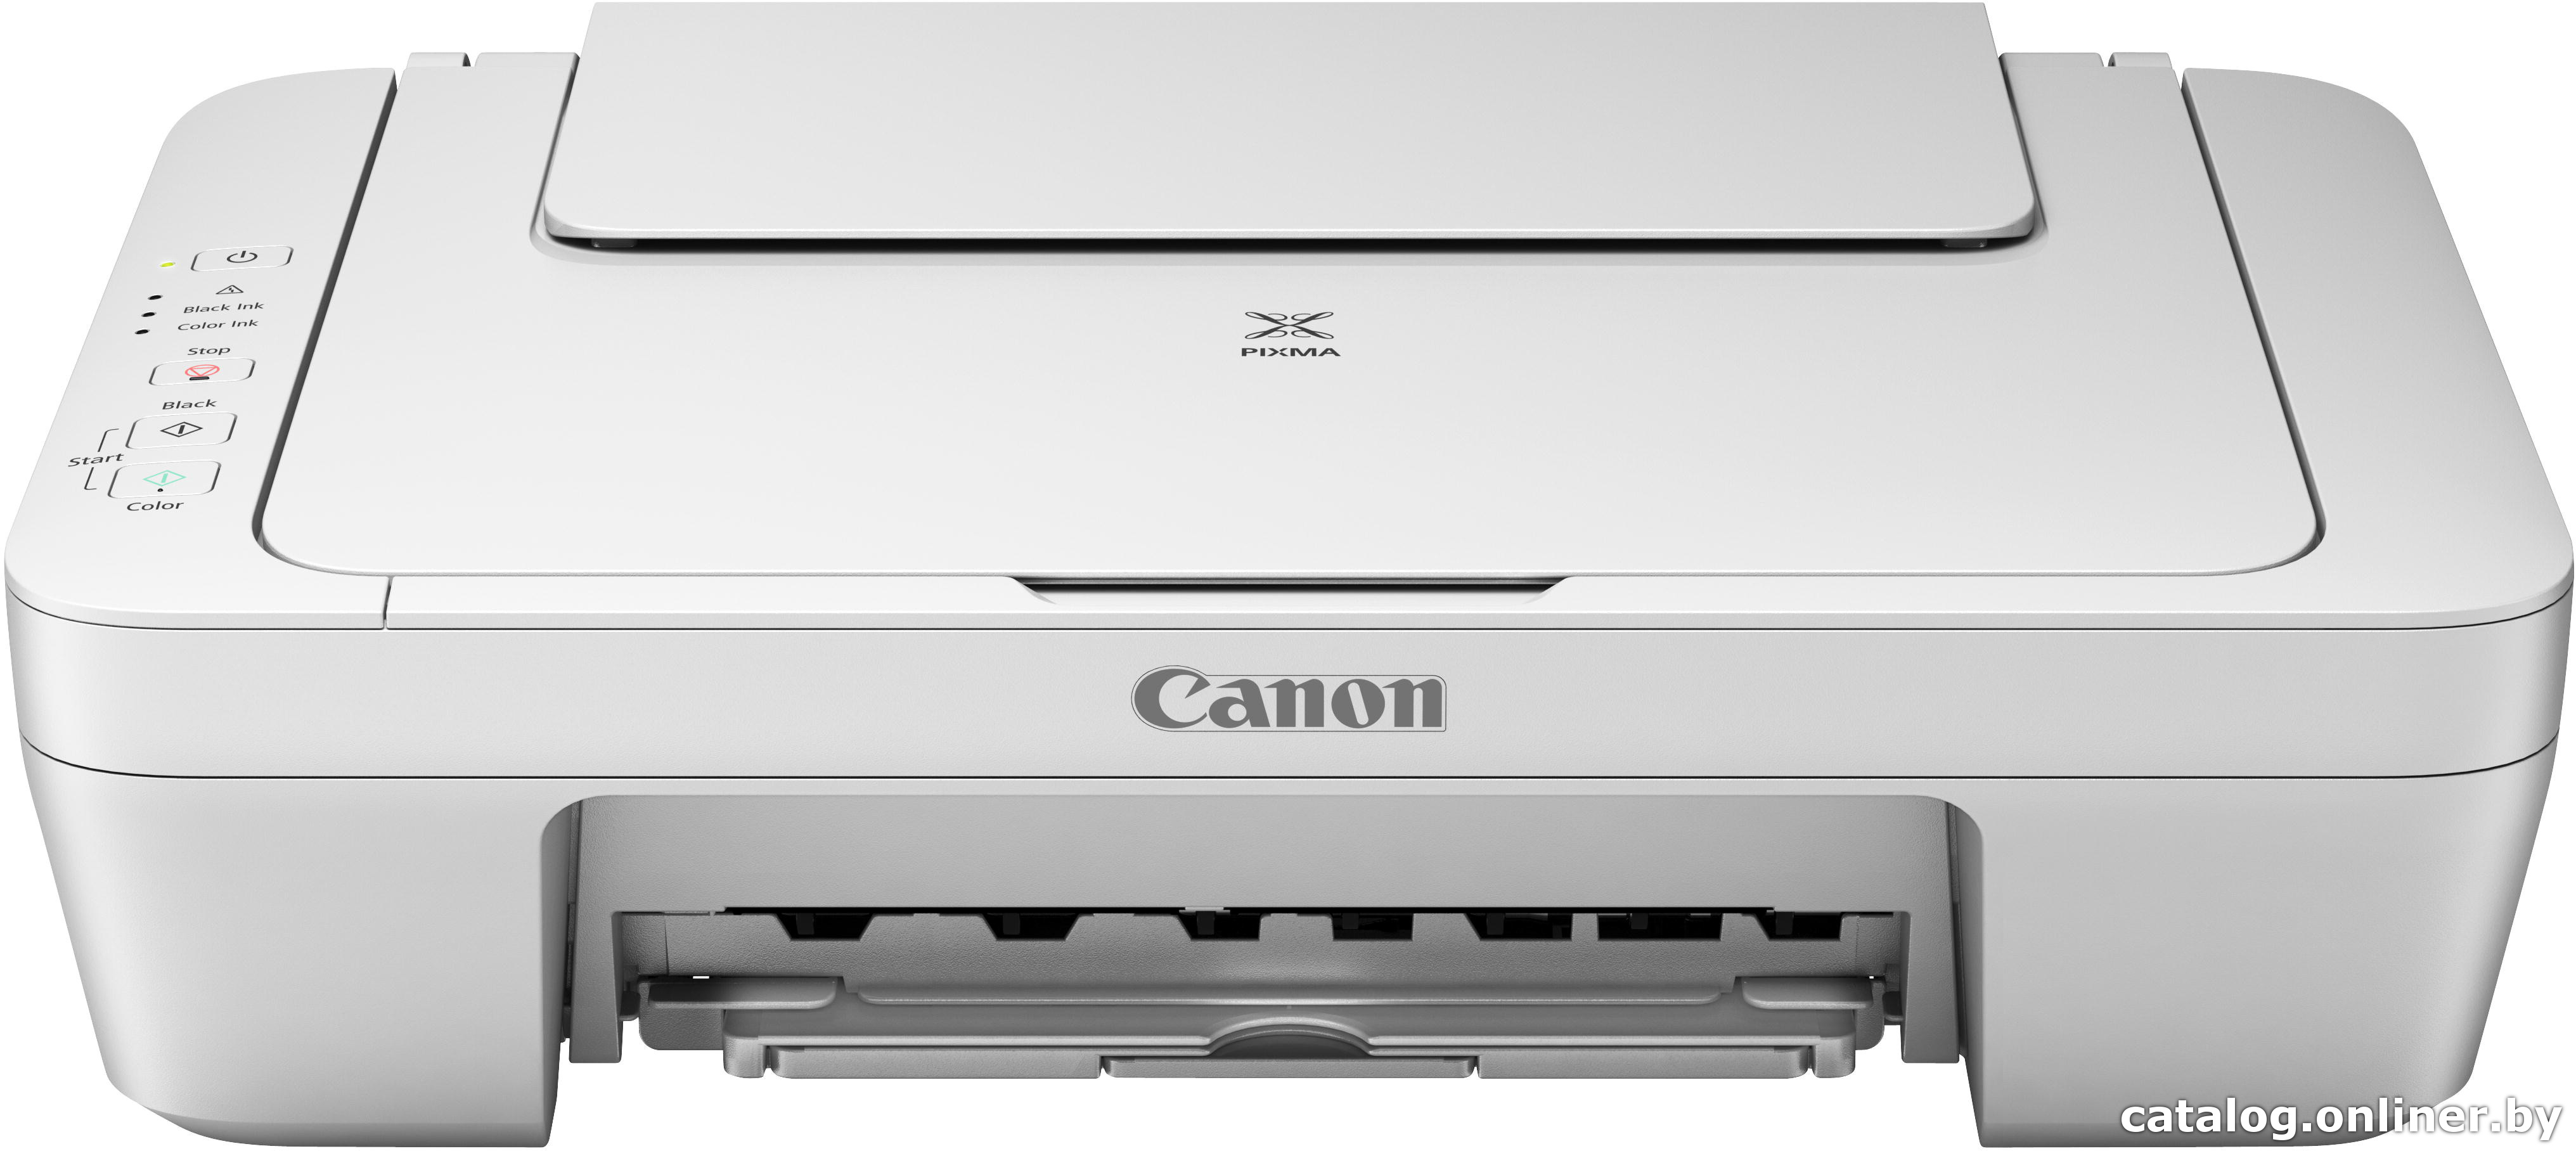 Canon pixma driver for mac high sierra requirements